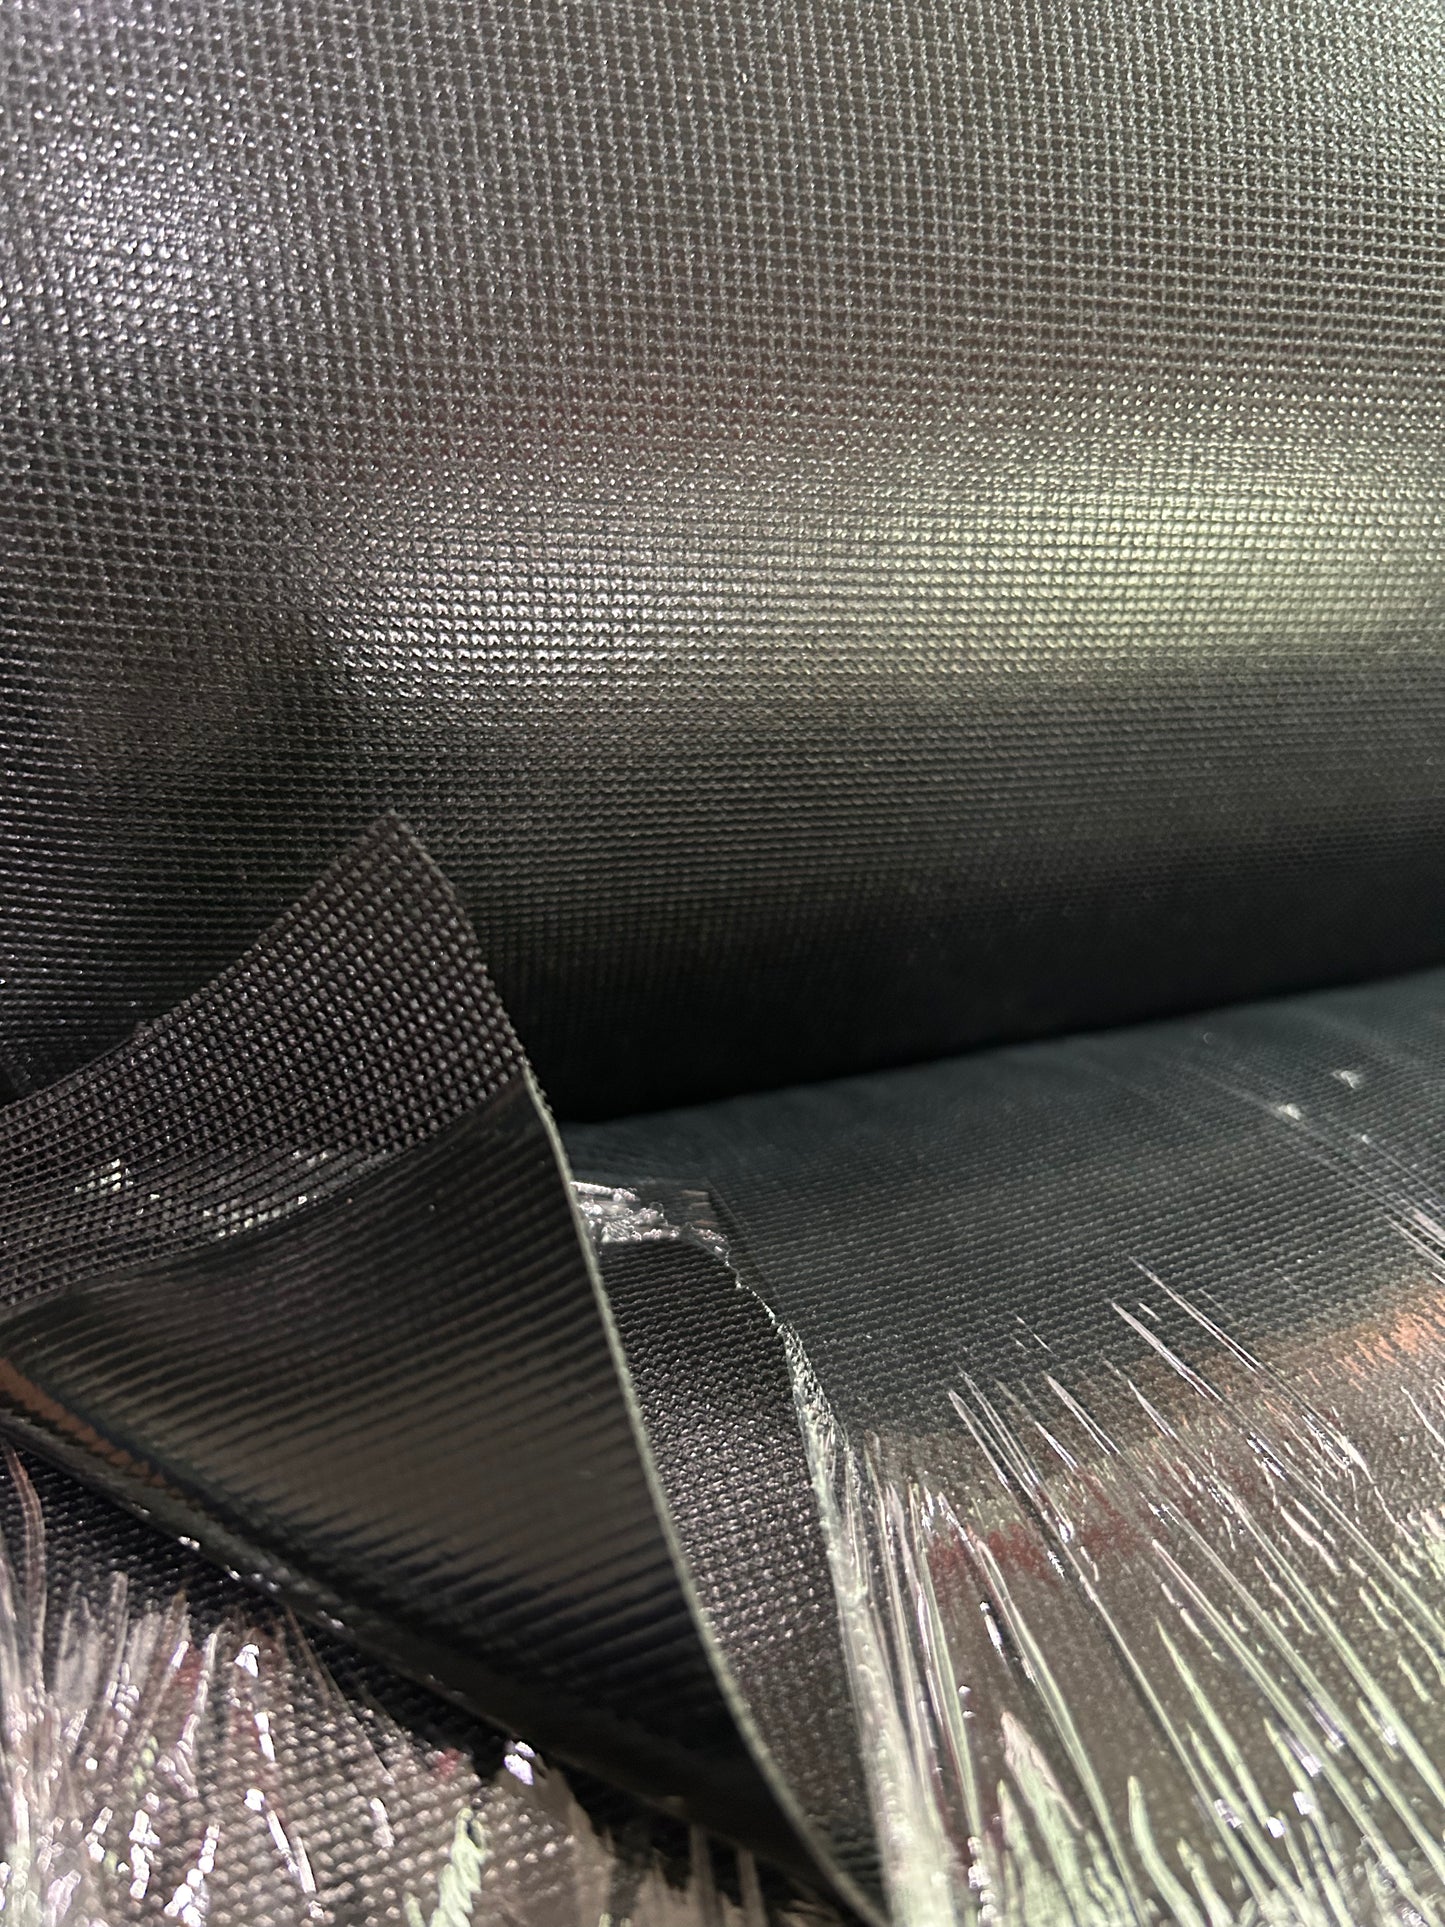 EMS Suit Rubber Sheet With Mesh